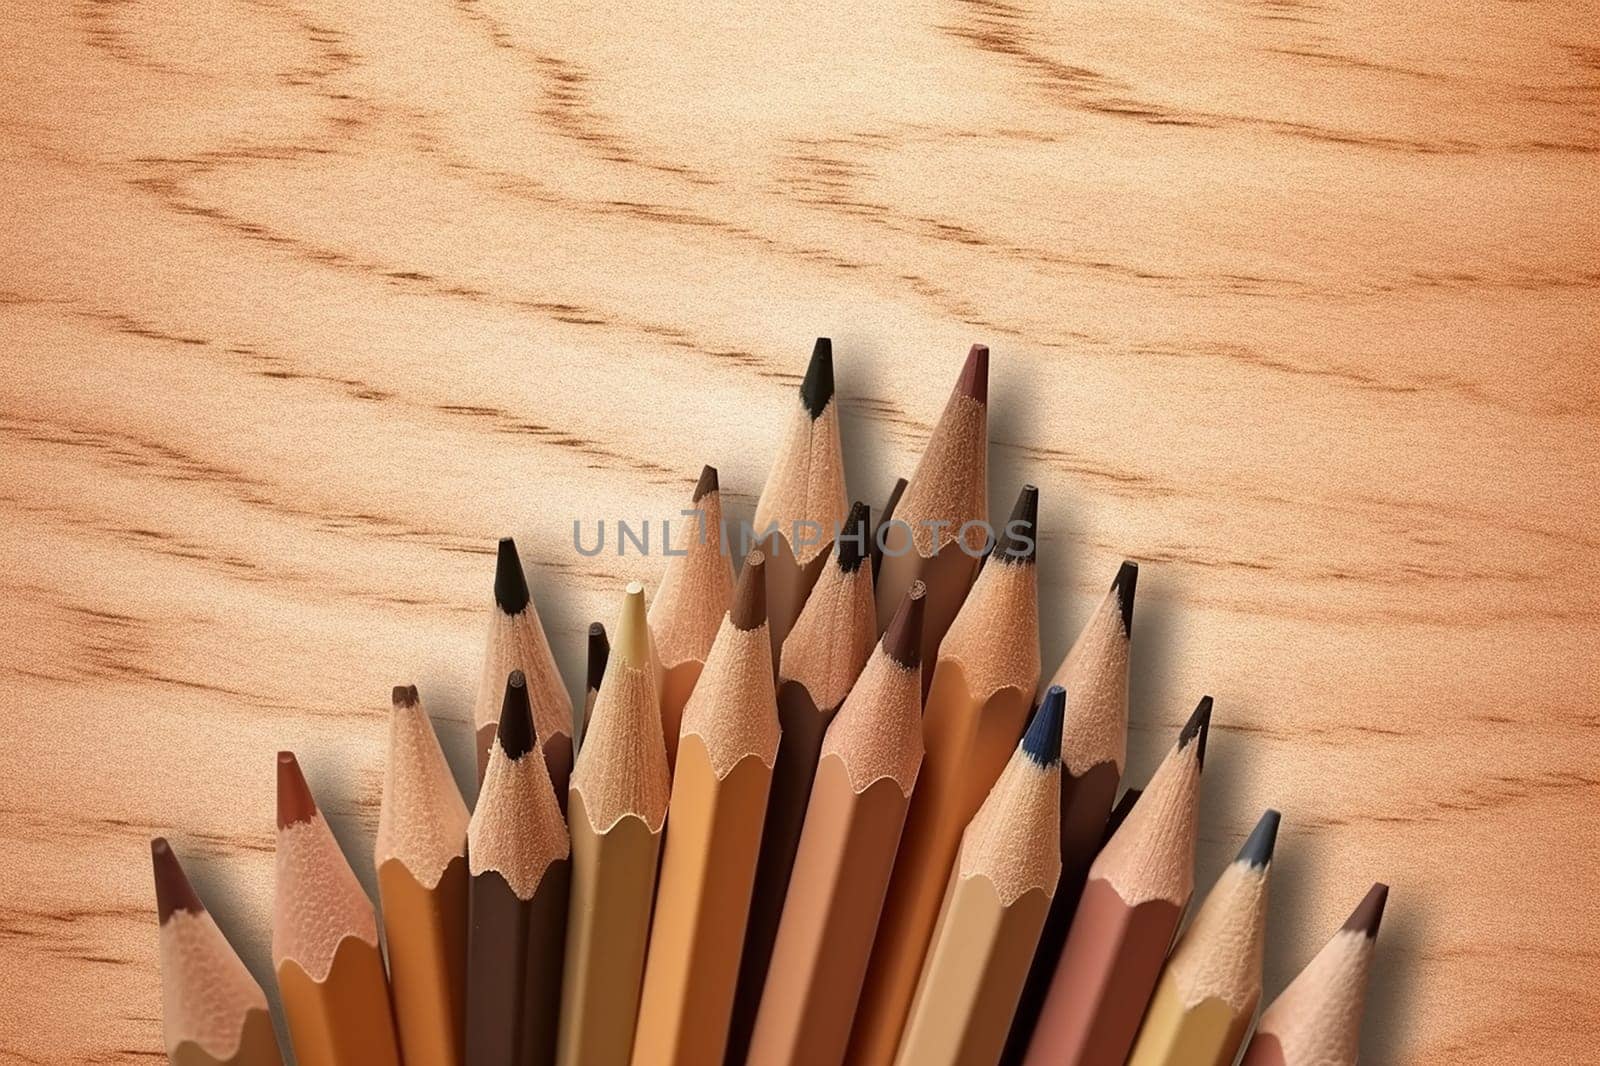 A collection of sharpened pencils arranged on a wooden surface.